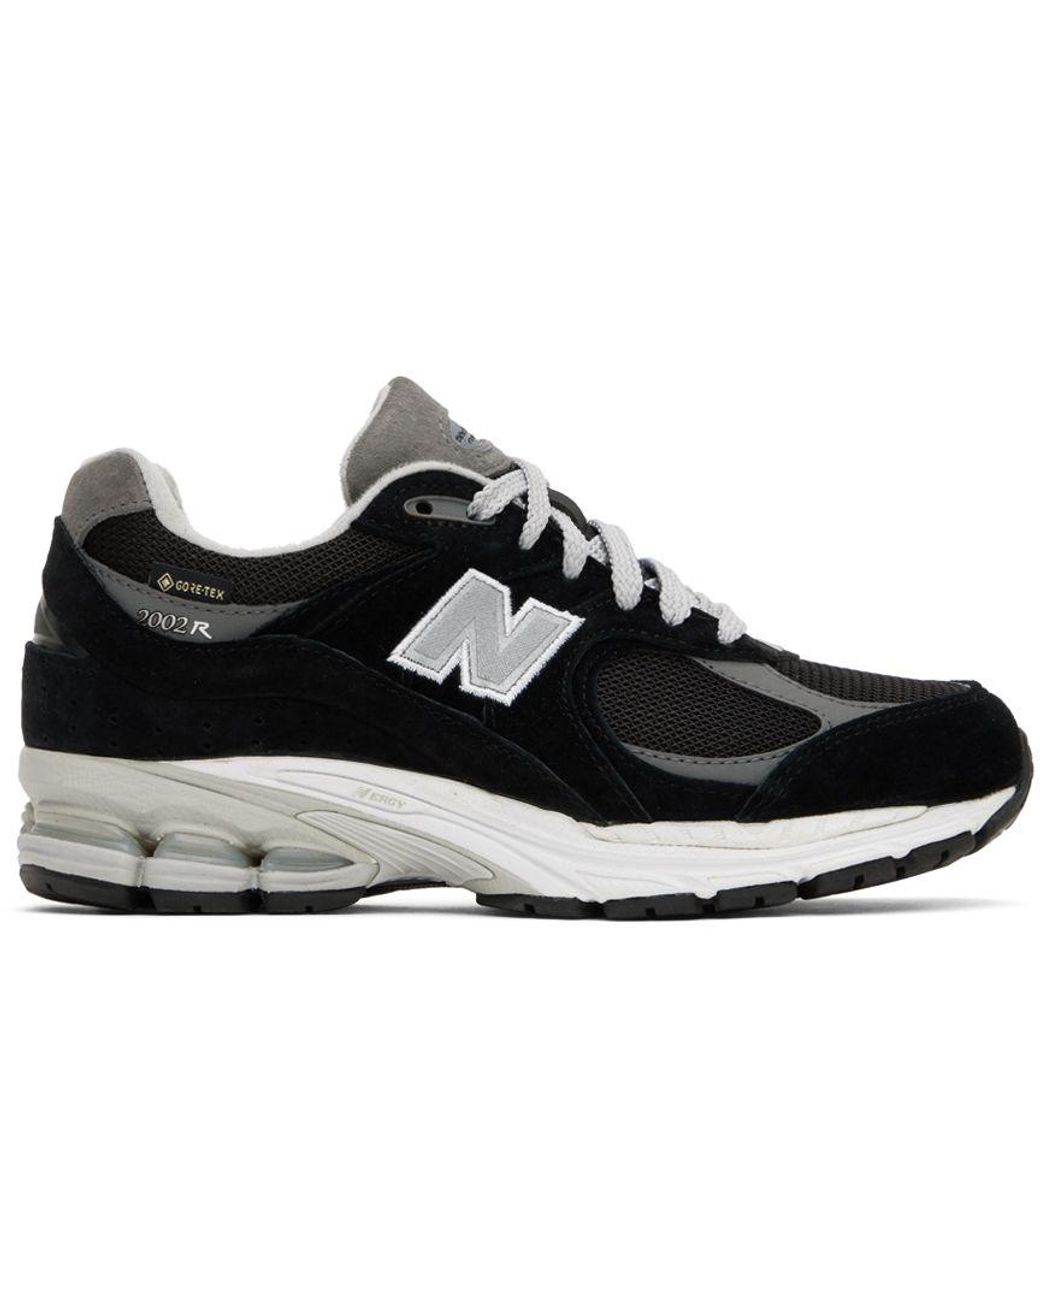 New Balance 2002rx Sneakers in Black | Lyst